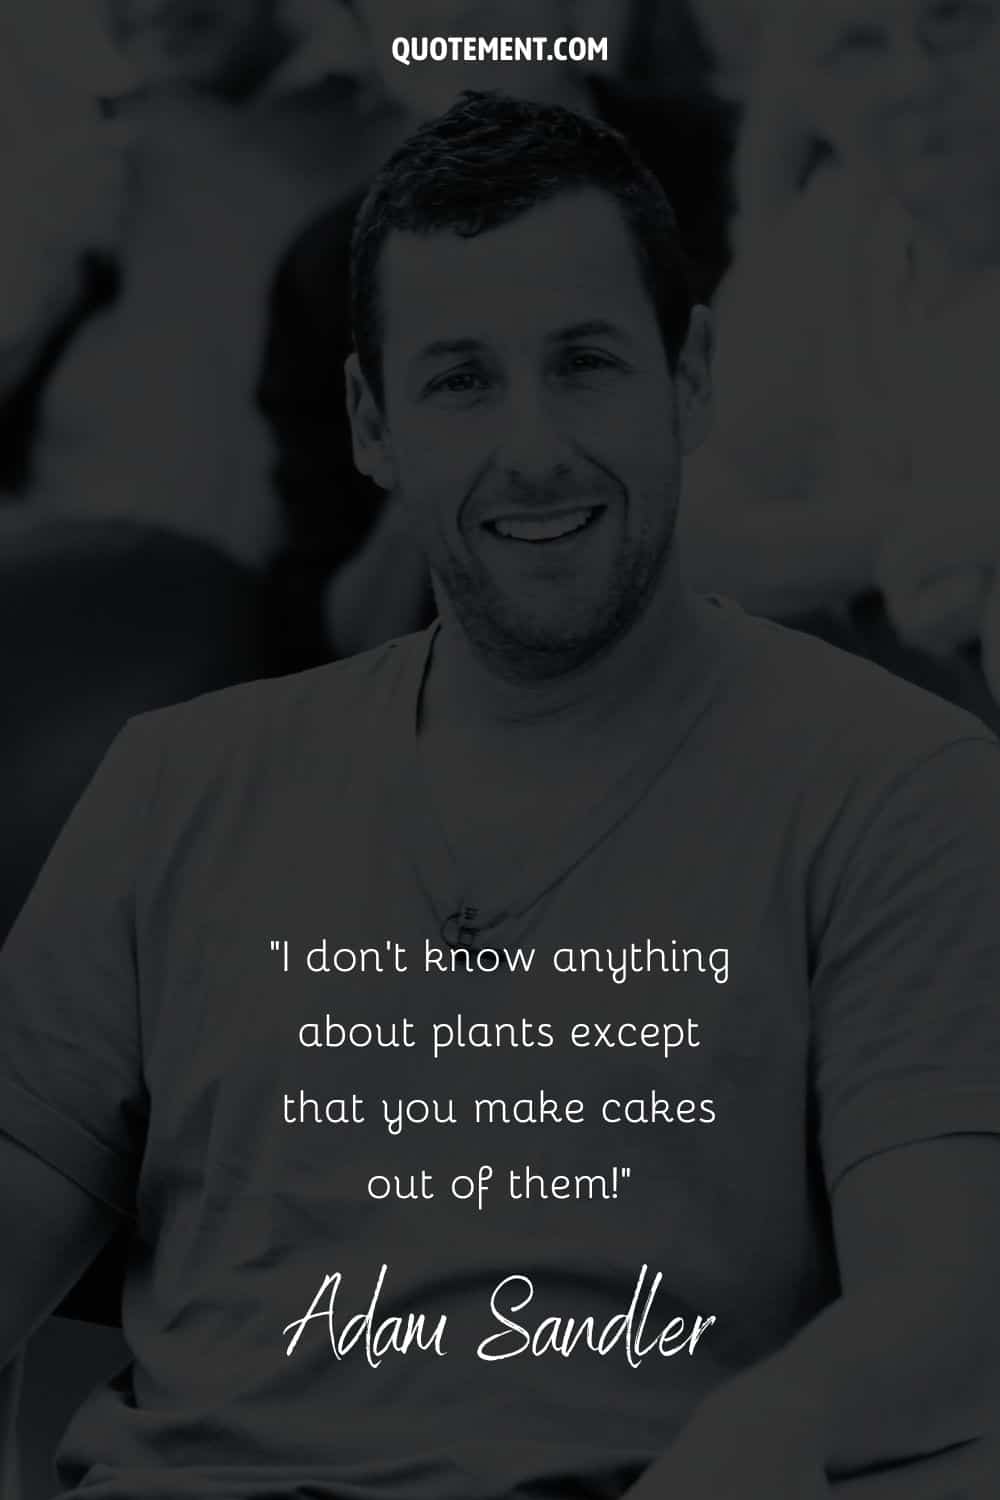 Funny uplifting quote by Adam Sandler from Bedtime Stories